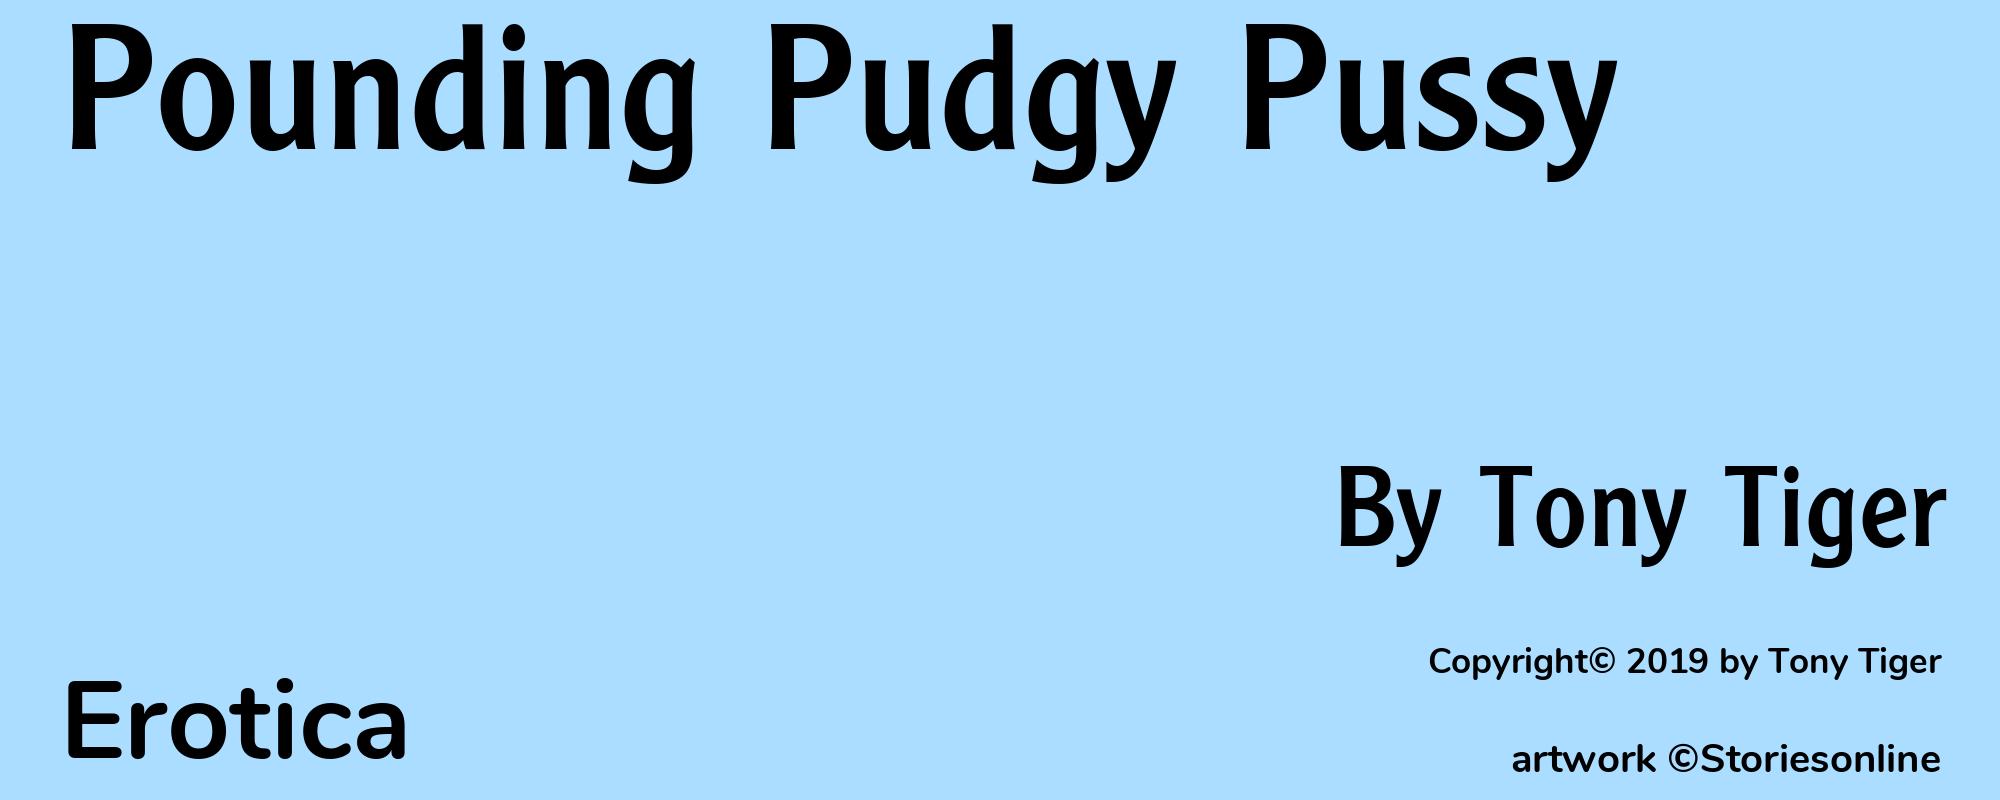 Pounding Pudgy Pussy - Cover